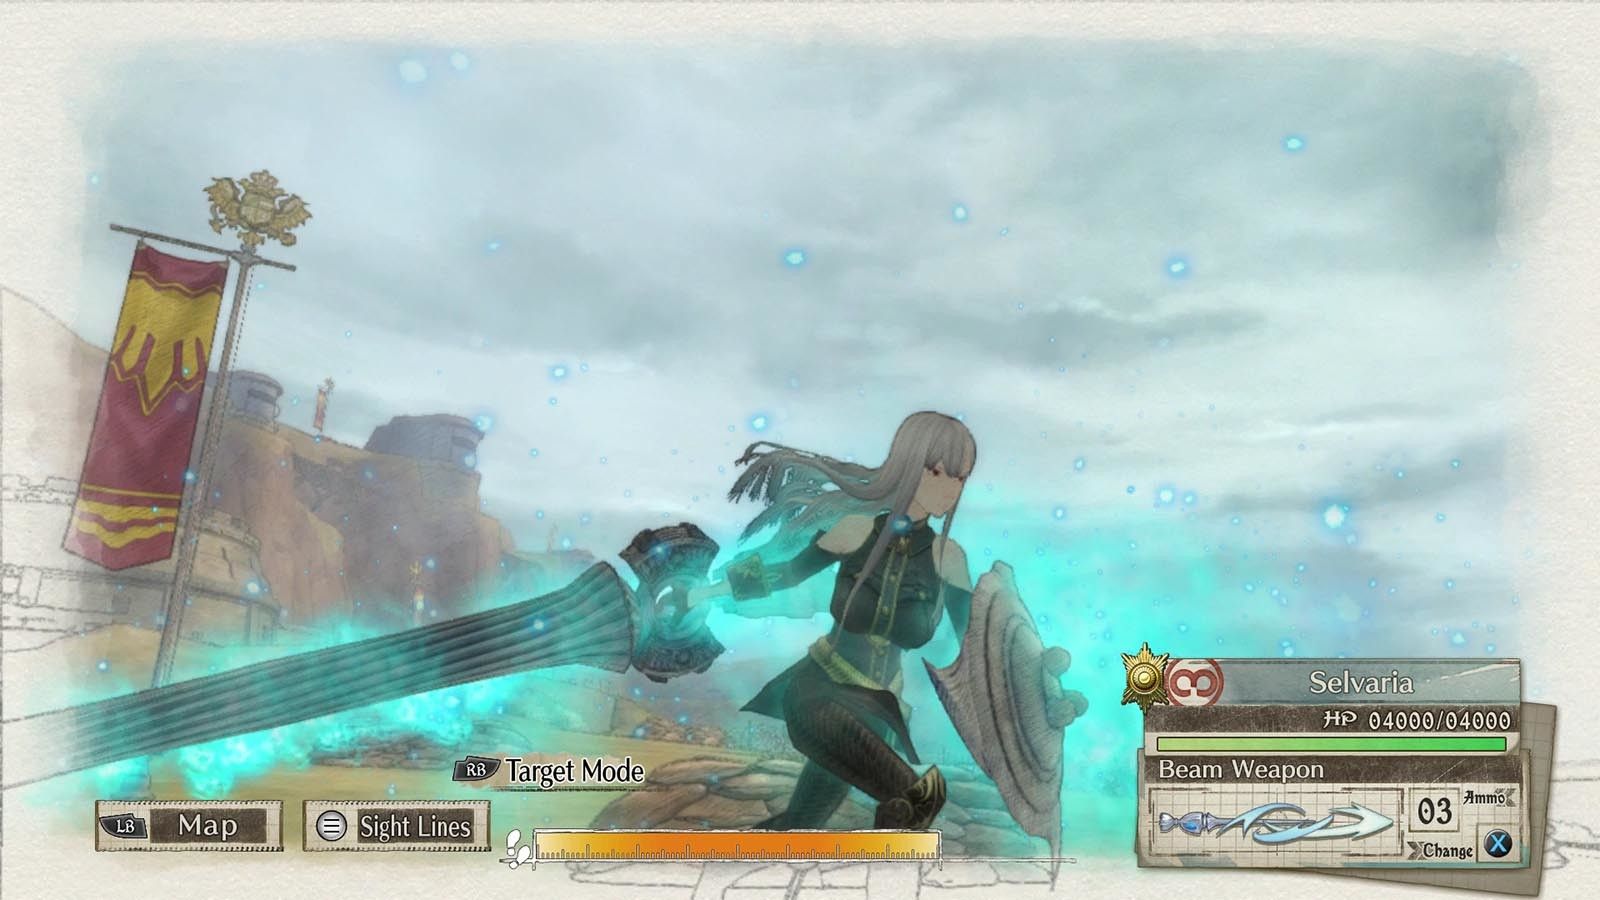 Valkyria character target mode